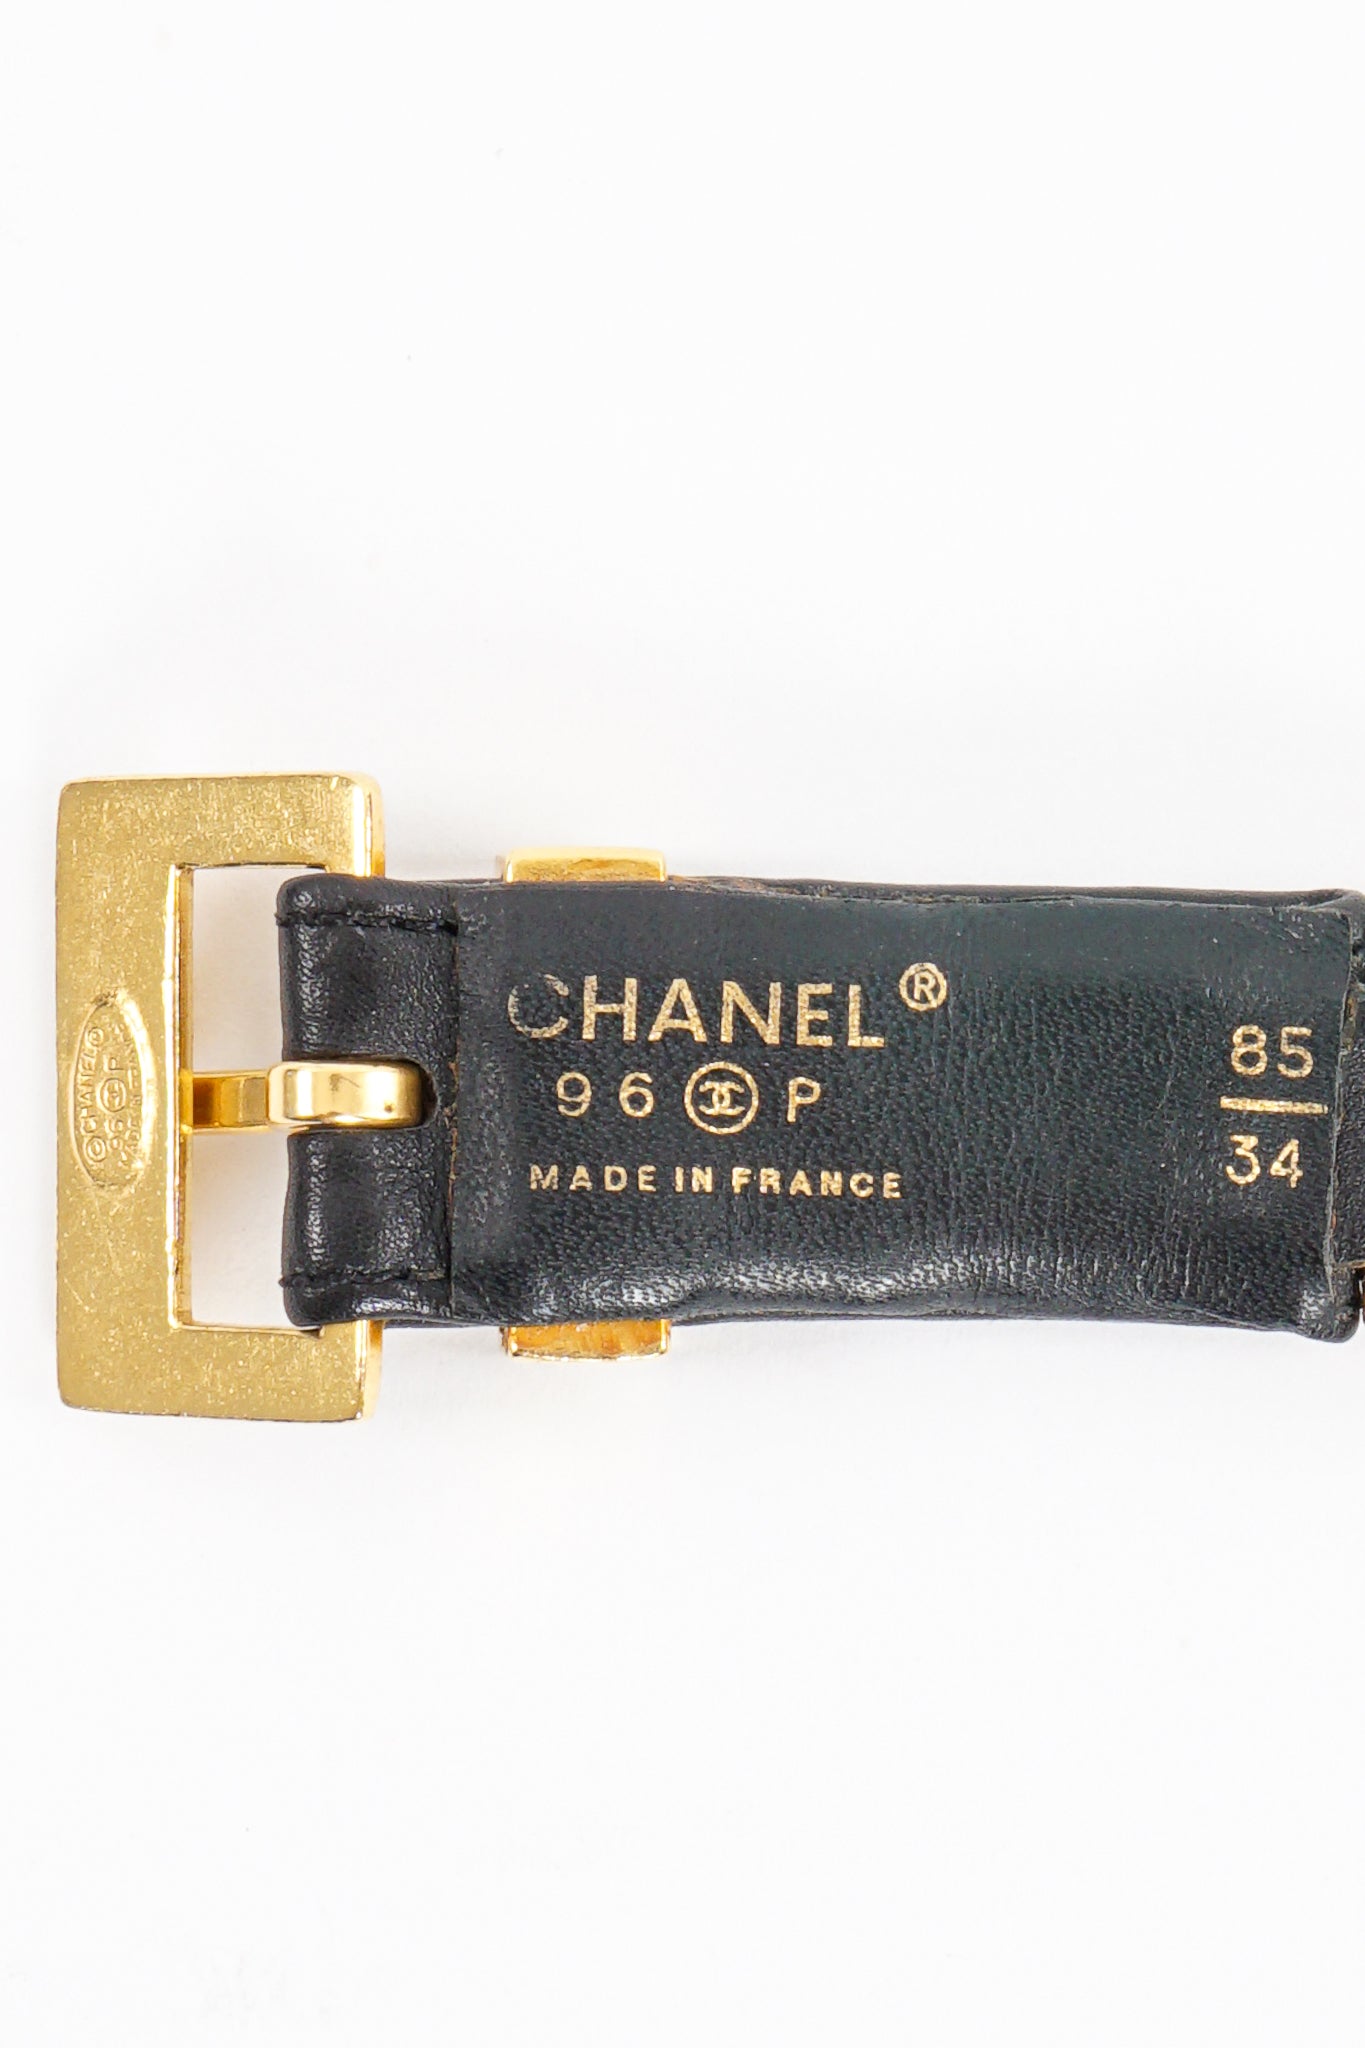 Vintage Chanel Iconic Woven Leather Chain Belt signature cartouche at Recess Los Angeles